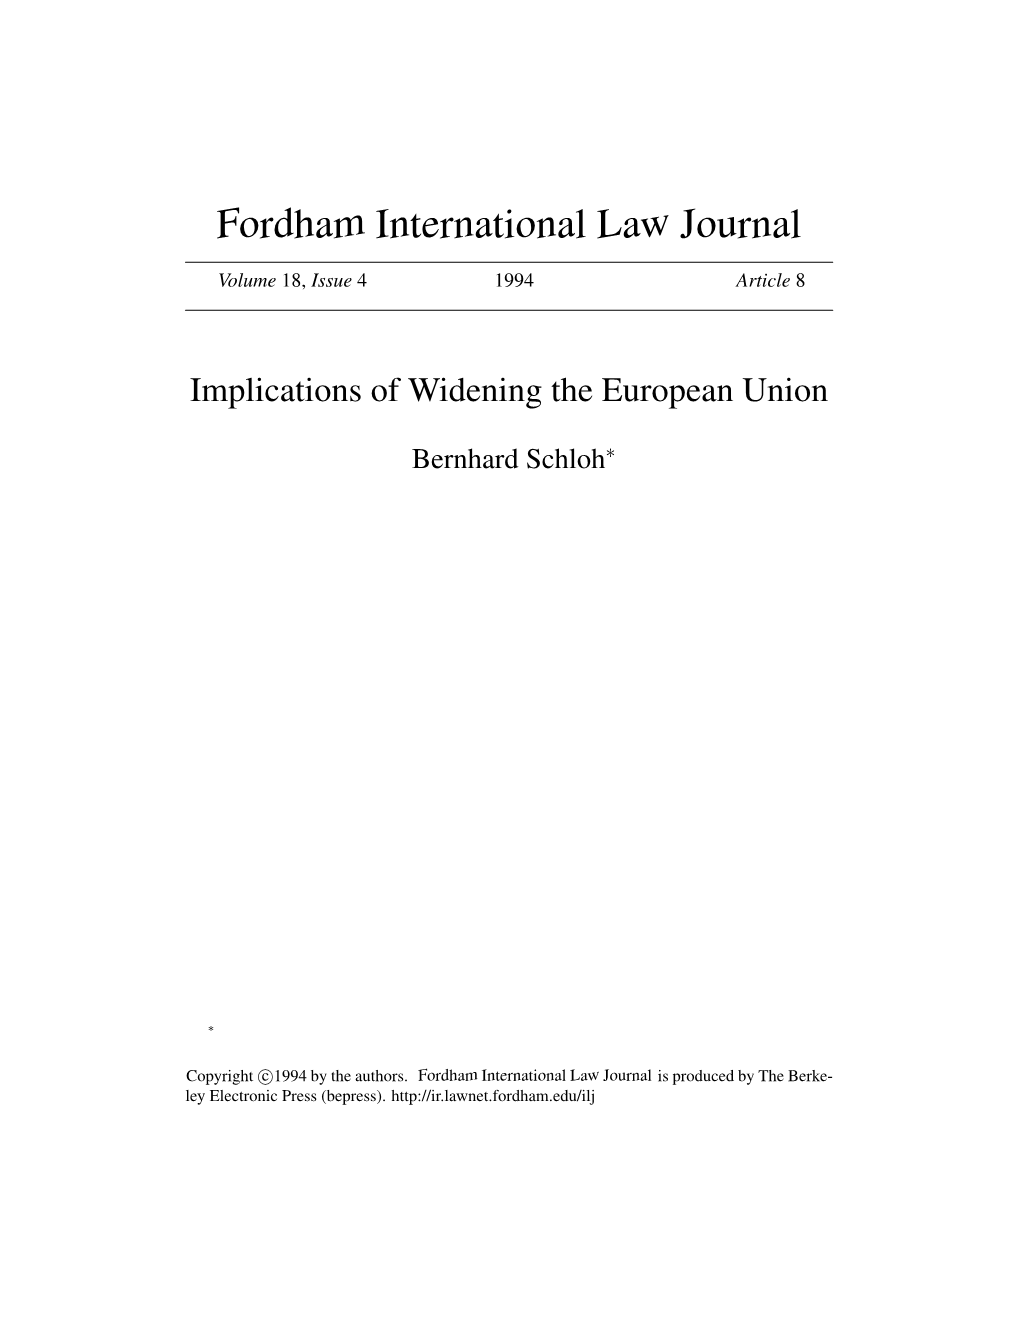 Implications of Widening the European Union